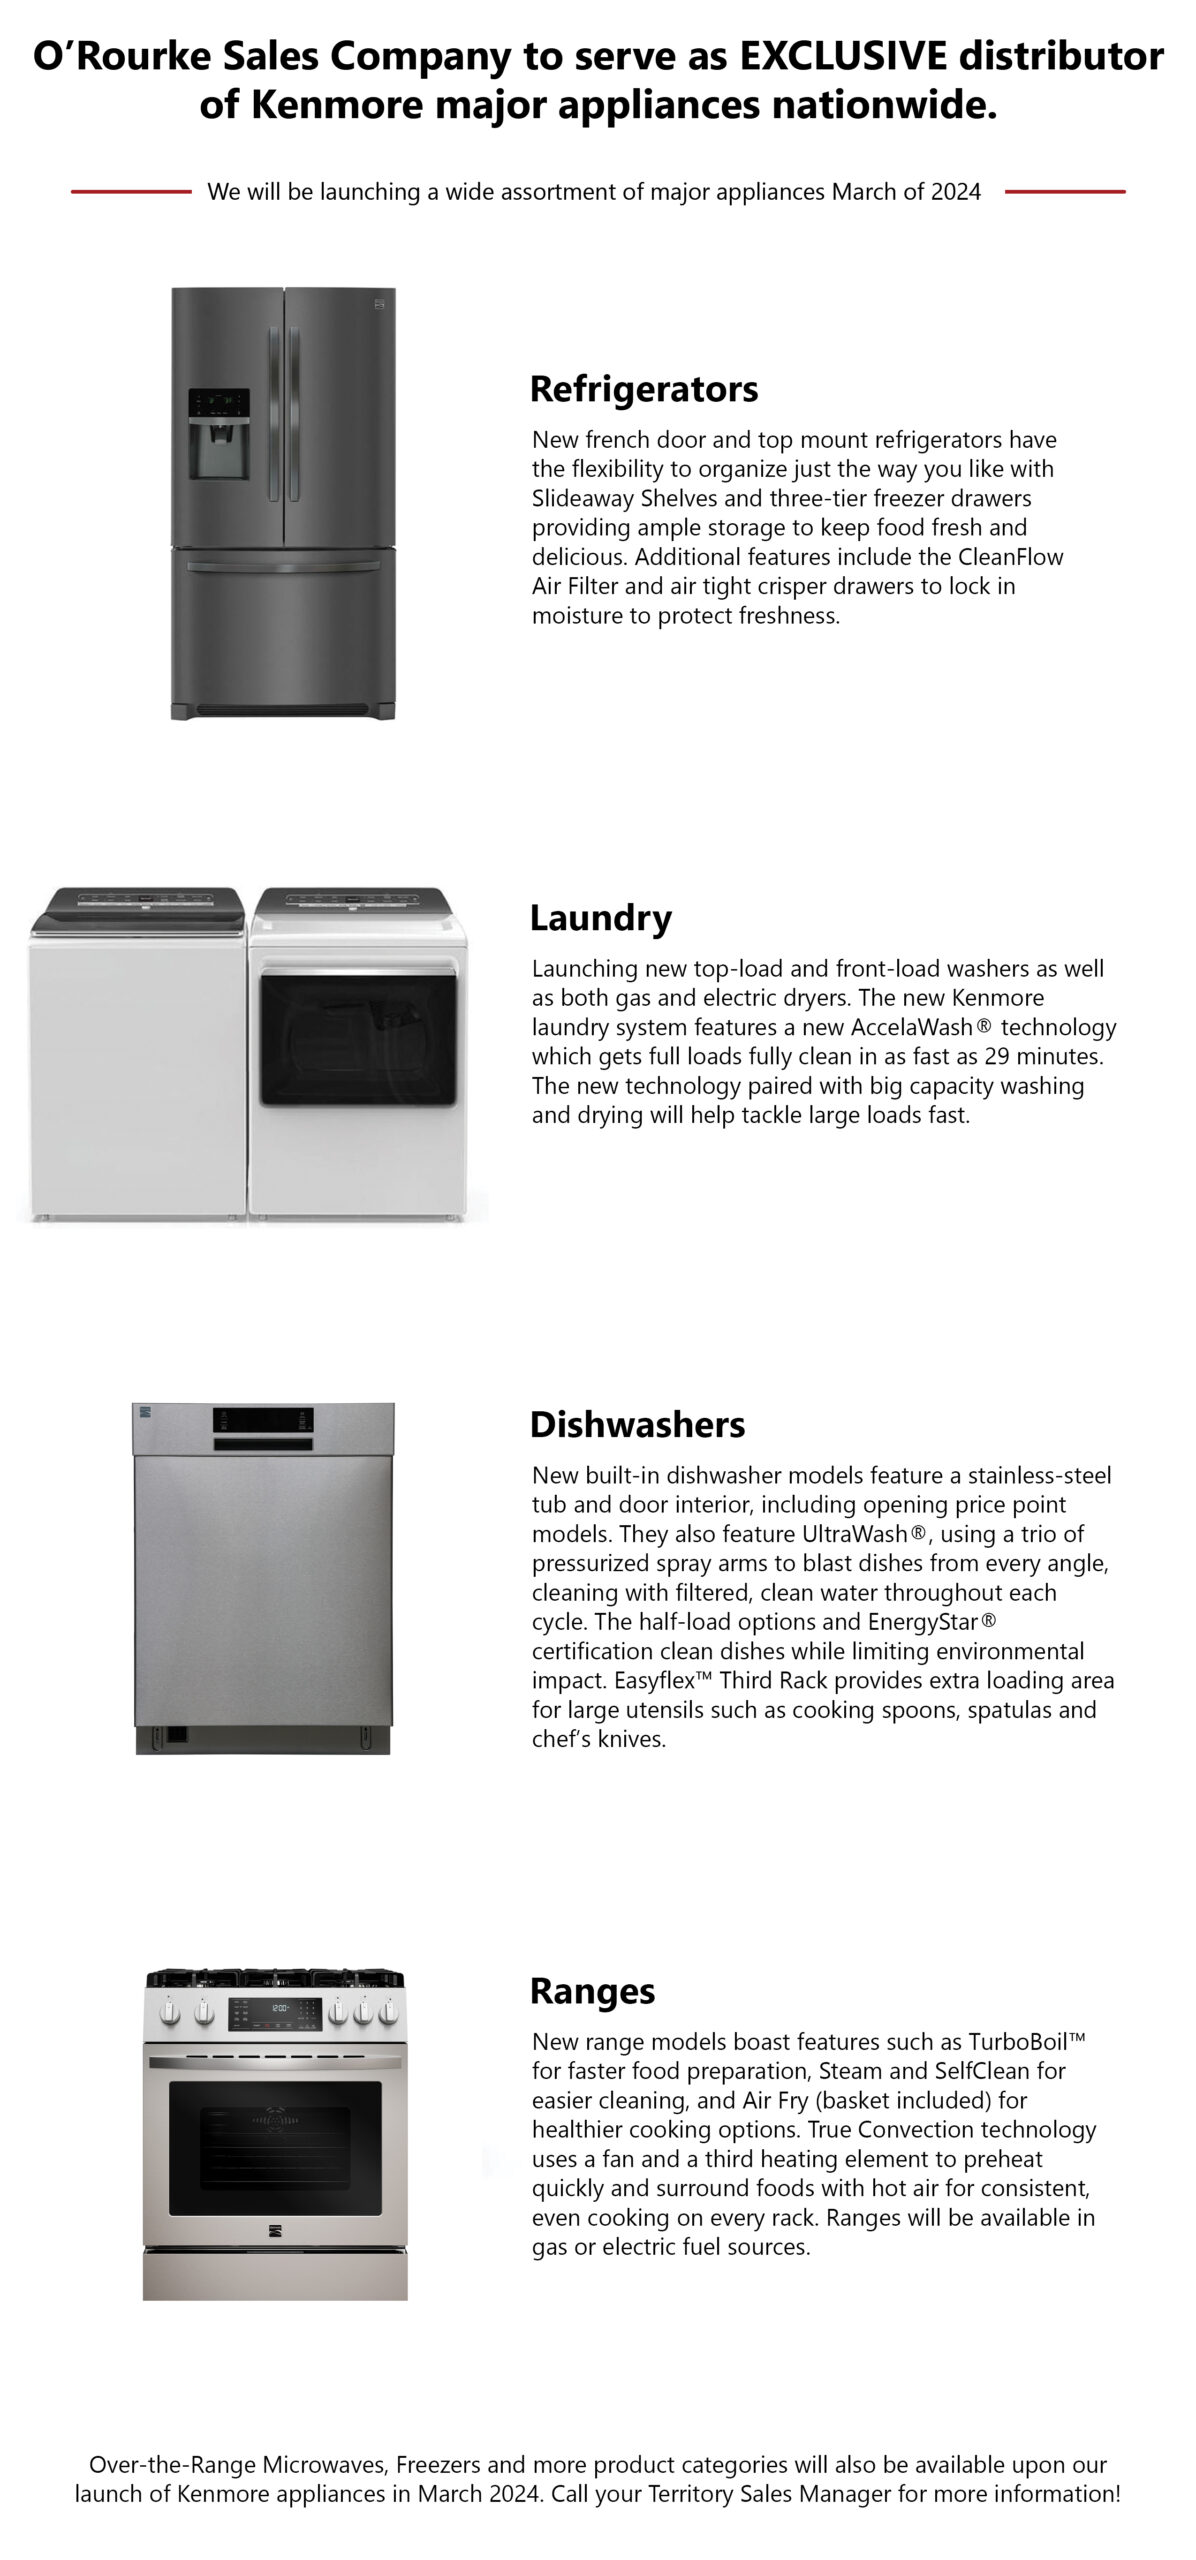 Kenmore Product Categories